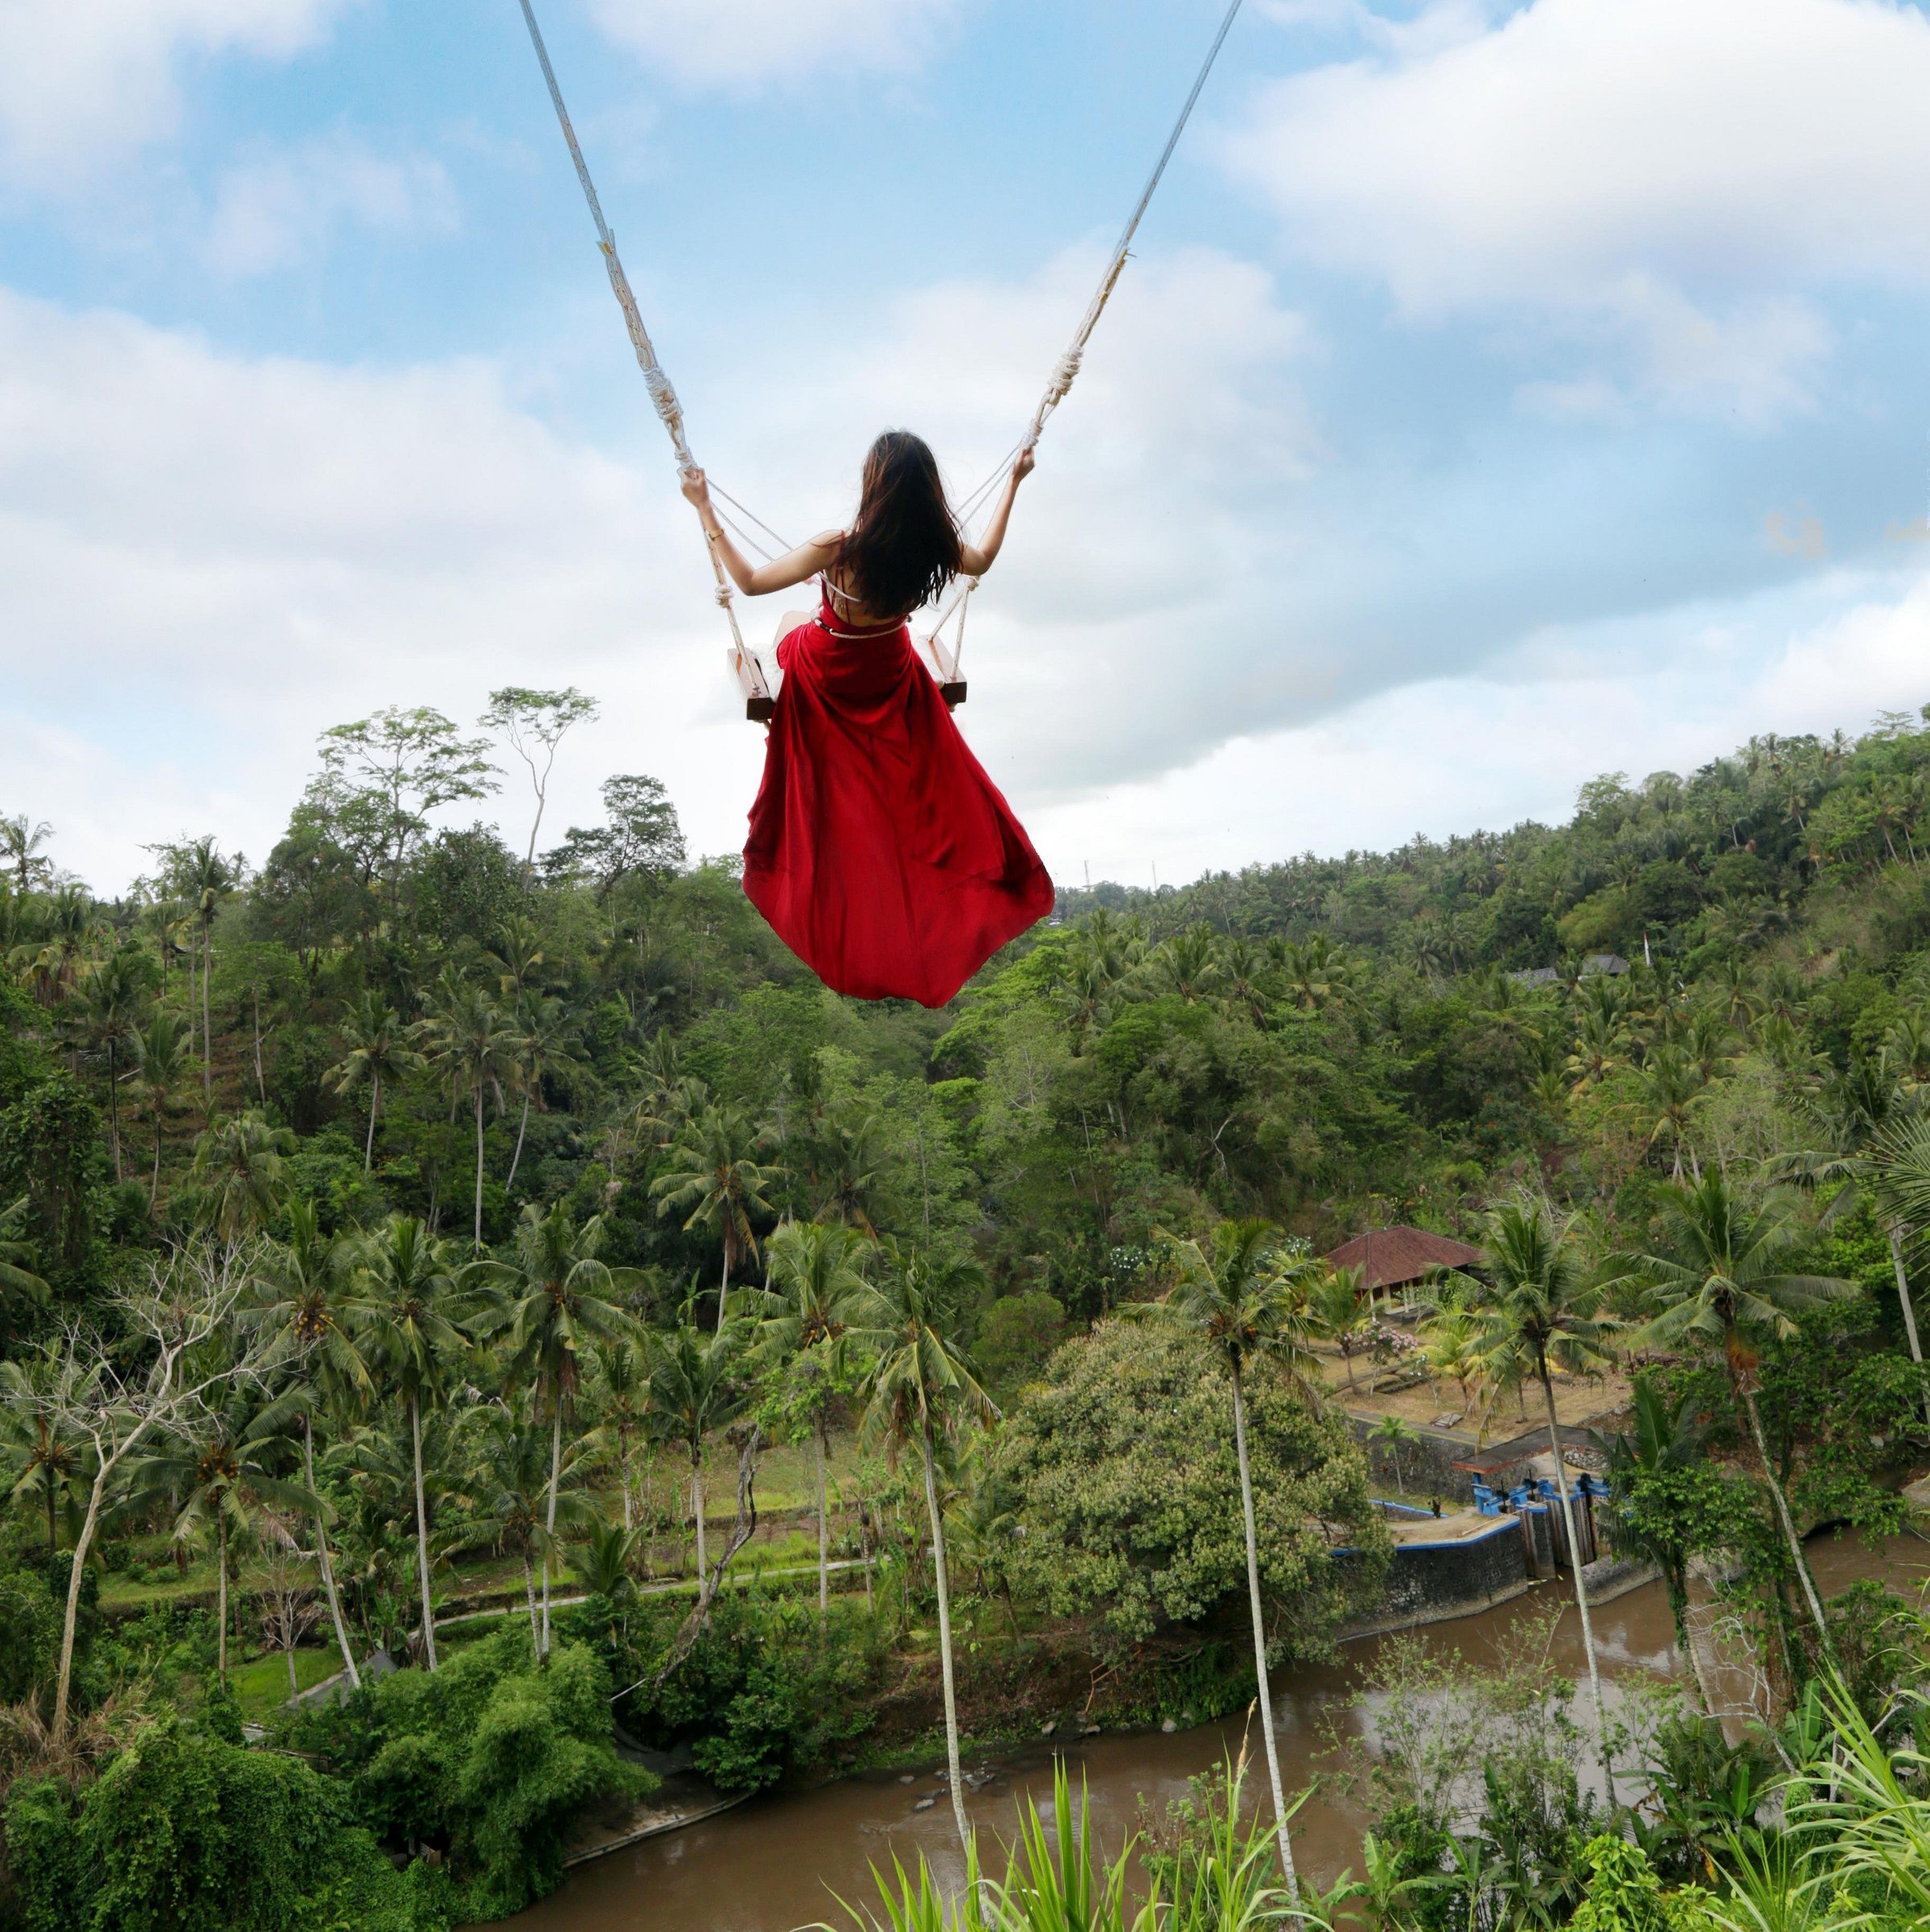 Picheaven Bali Swing Ubud All You Need To Know Before You Go